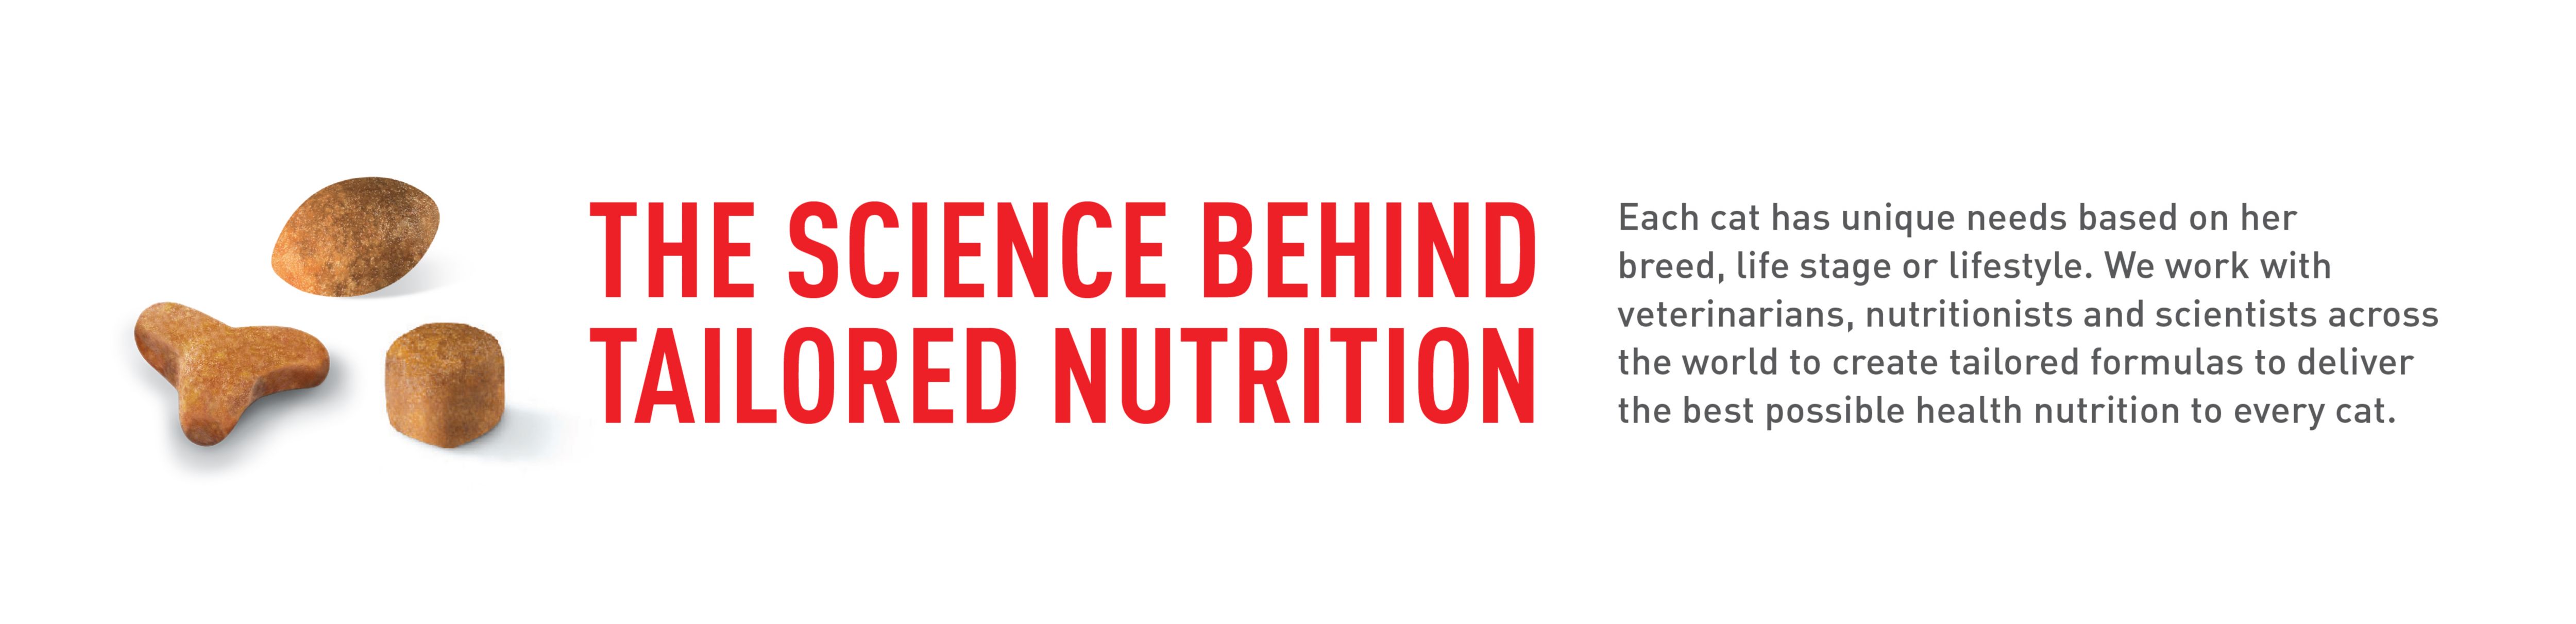 The Science behind tailored nurtrition